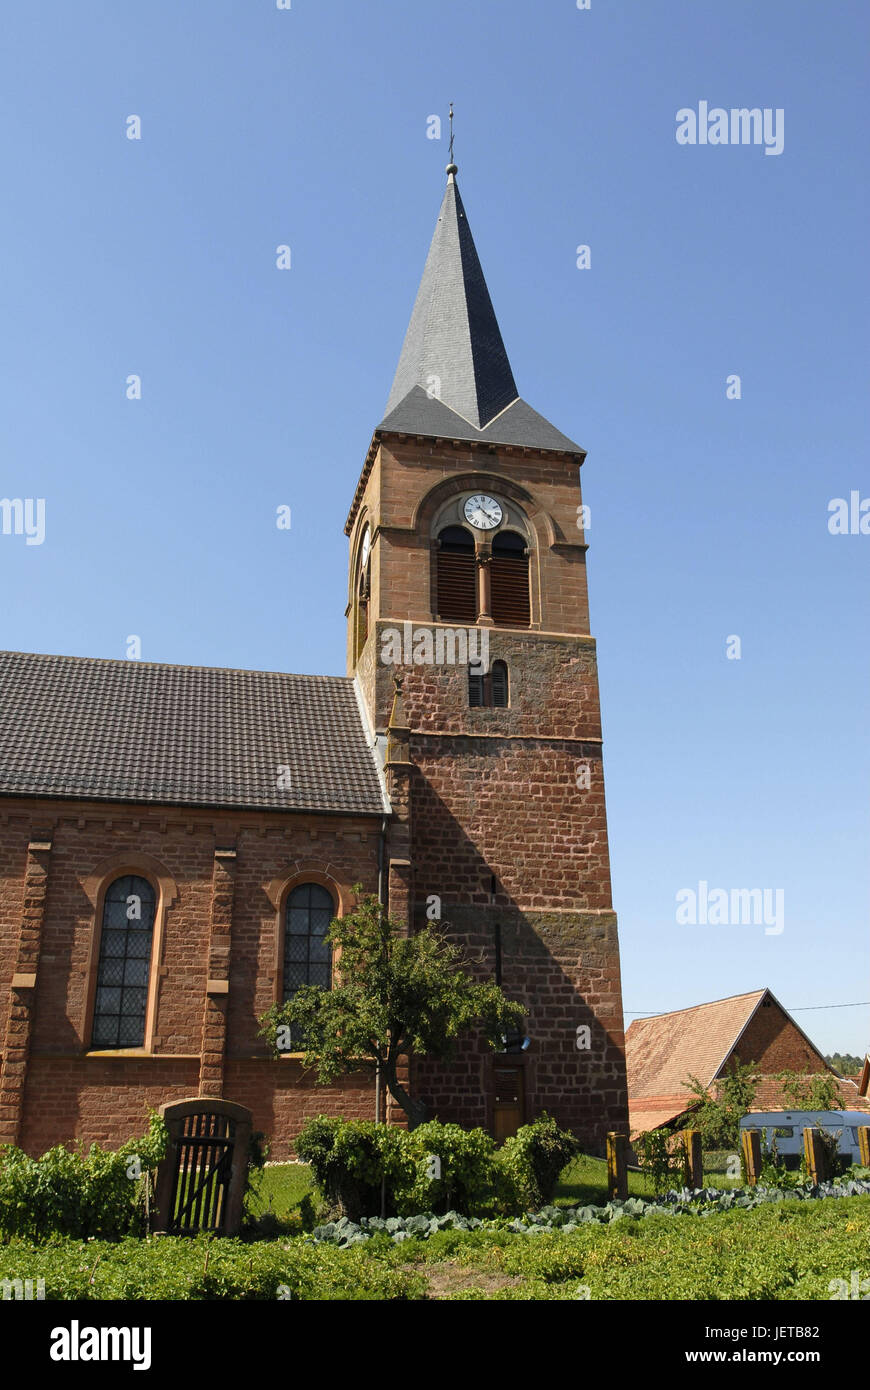 France, Alsace, Bas-Rhin, church, detail, town, church, steeple, structure, building, architecture, brick building, tower, clock, faith, religion, Christianity, sky, blue, cloudless, outside, deserted, Stock Photo